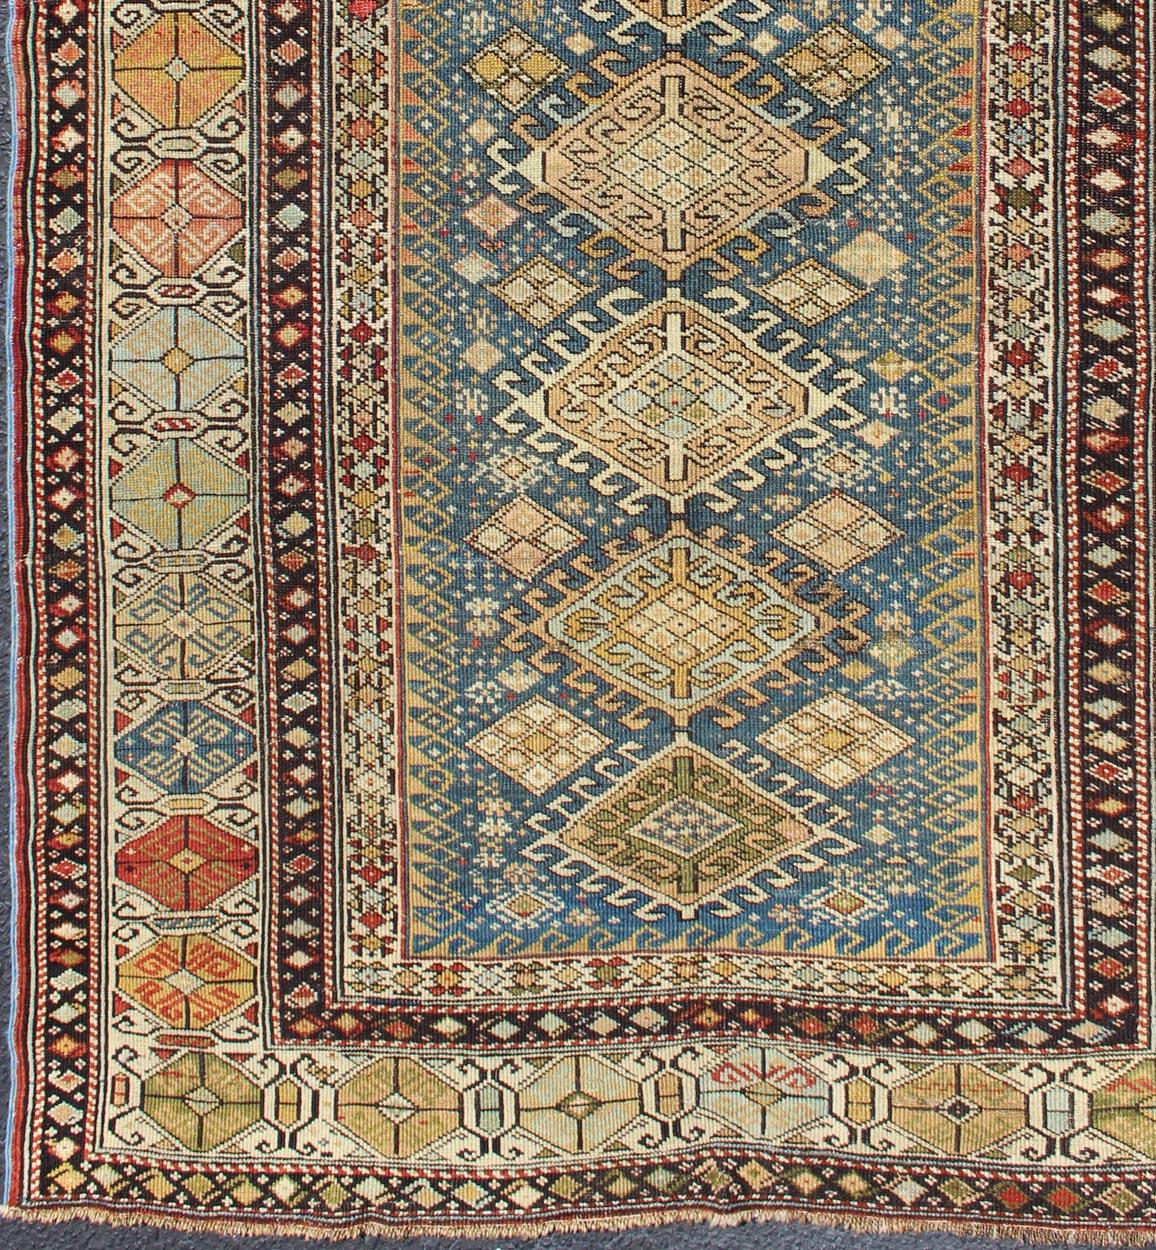 Shirvan Antique Caucasian Rug in Colorful Tones, rug 19-0810, country of origin / type: Caucasus / Shirvan, circa 1880

This colorful medallion carpet from Shirvan features a vibrant color palette and exquisitely intricate designs.

Measures: 3'8 x